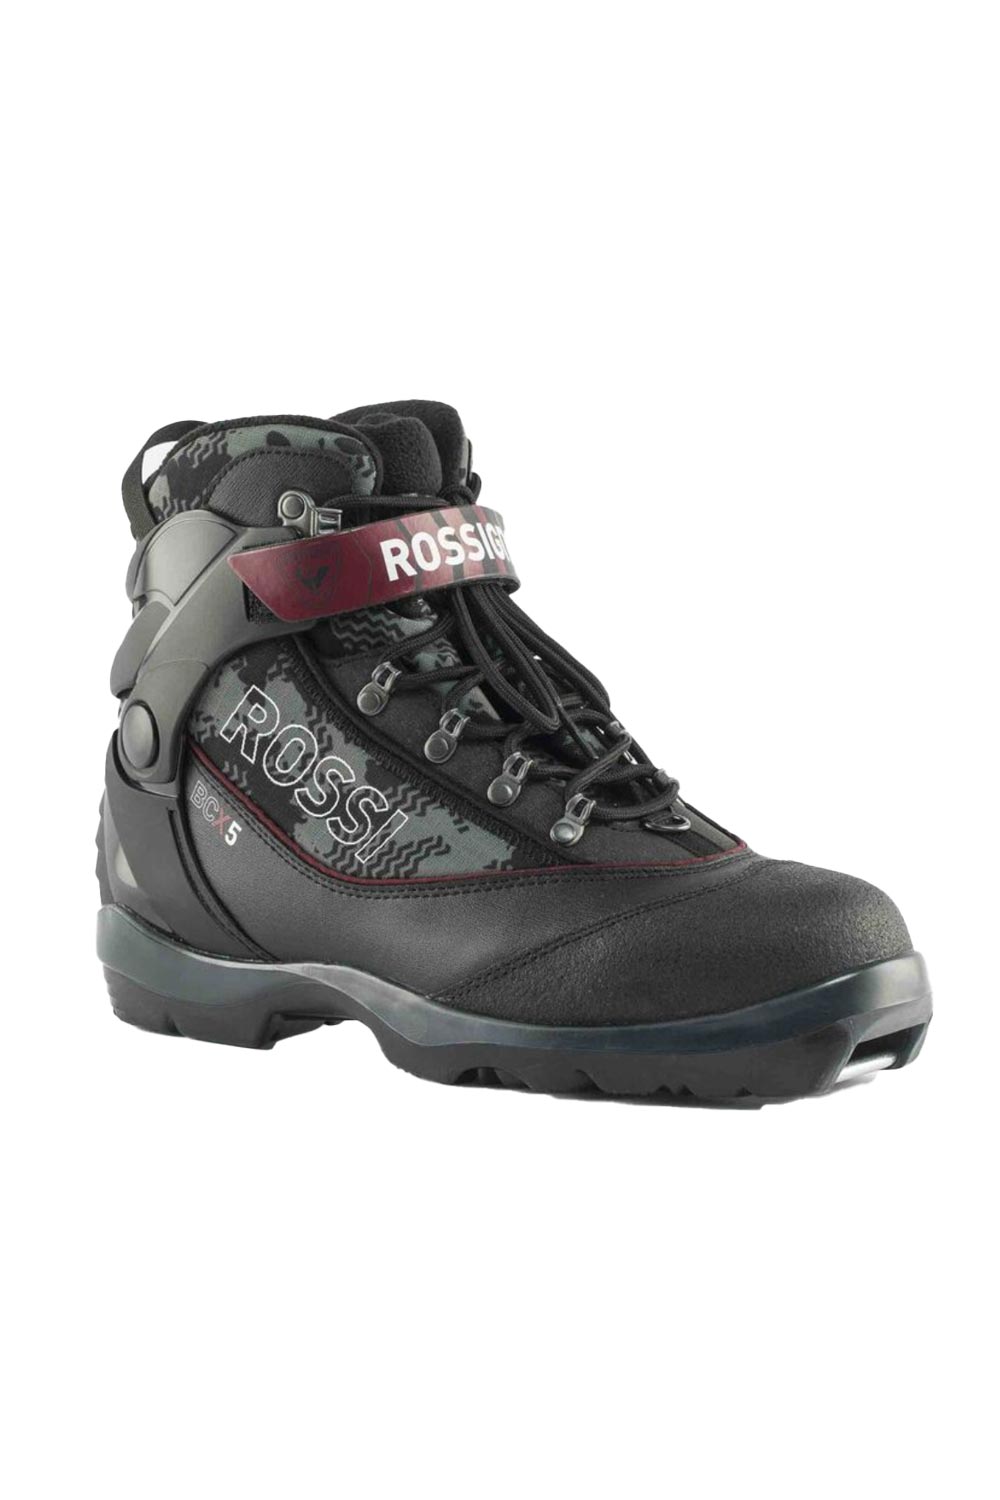 Rossignol cross country ski boot, black and gray